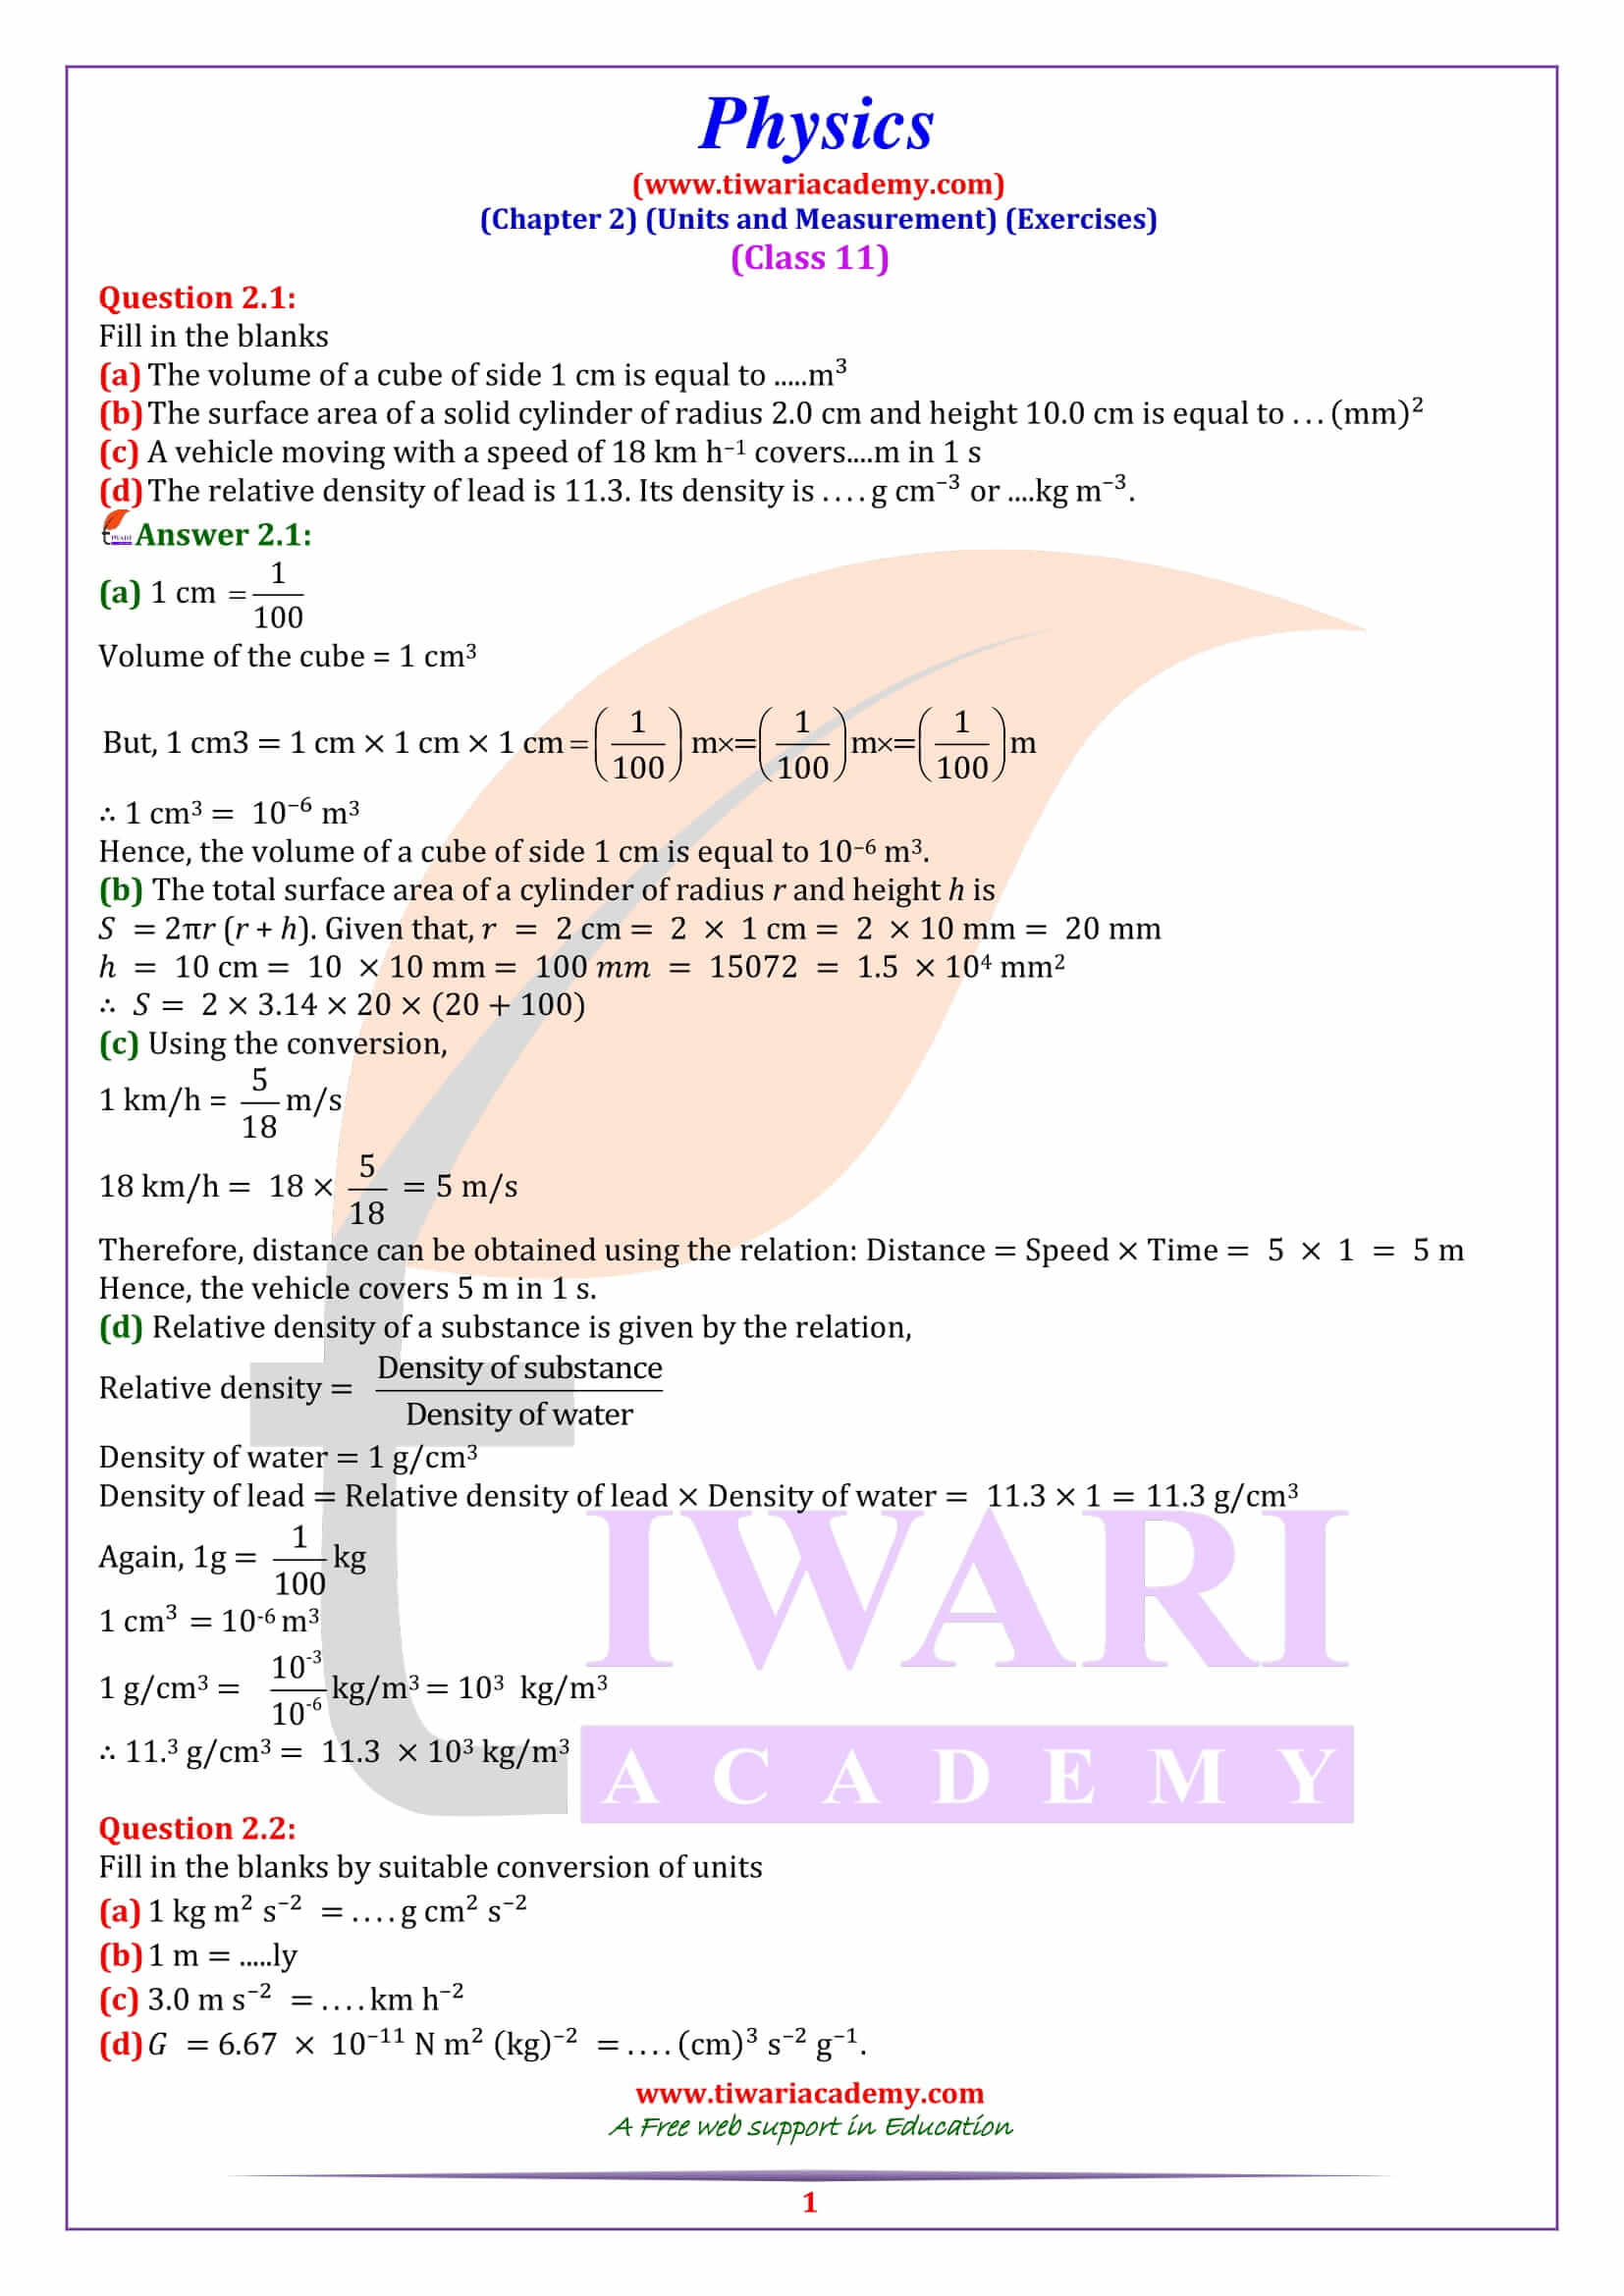 NCERT Solutions for Class 11 Physics Chapter 2 PDF download